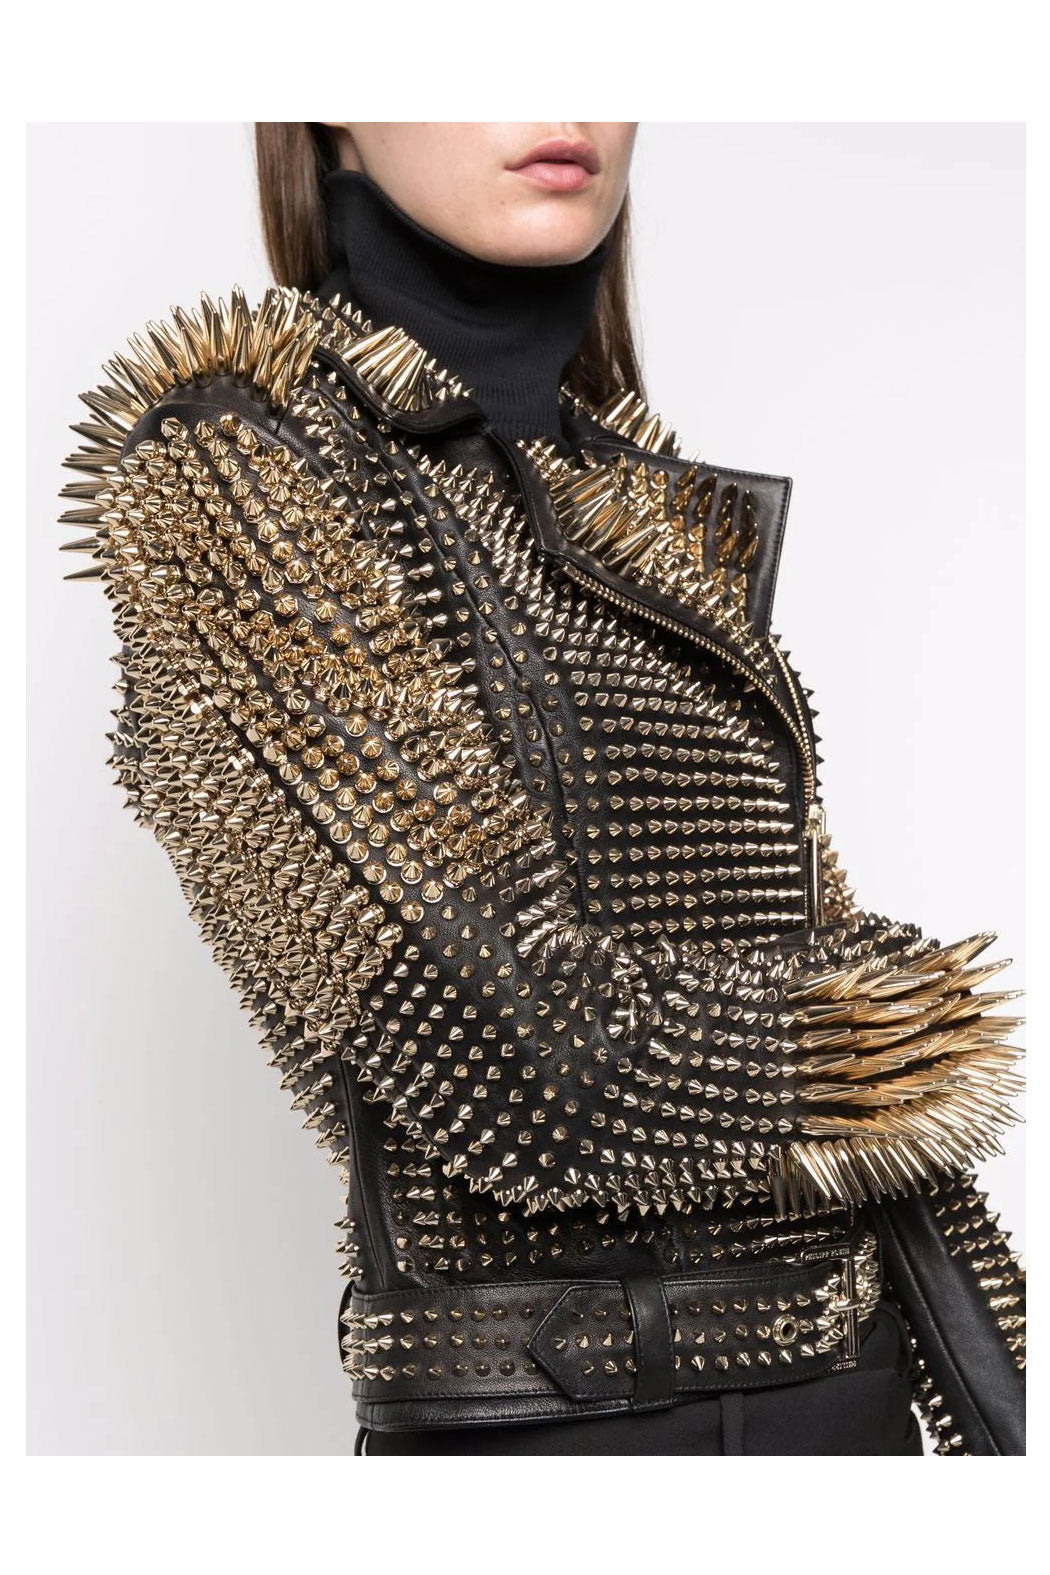 New Black Spiked Studded Punk Silver Long Leather Biker Jacket For Women